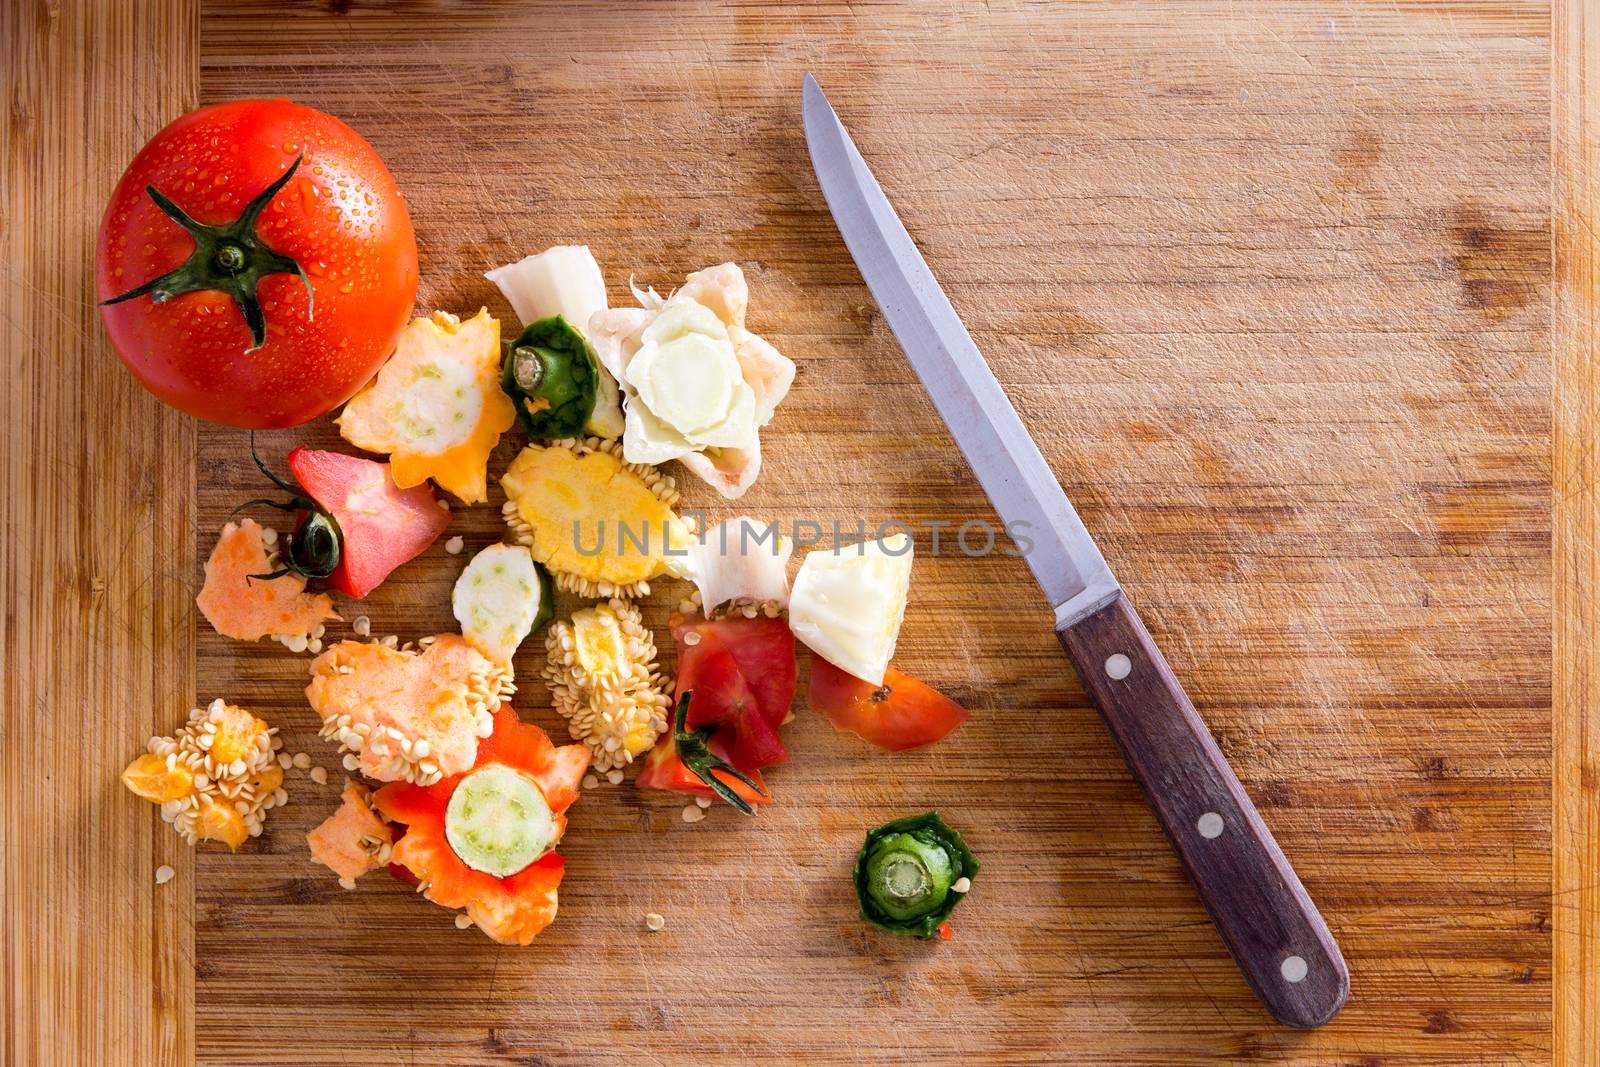 Organic Wastes from Veggies and Spices, Can be Used to Compost Garden Soil, on Top of Wooden Chopping Board with Kitchen Knife. Captured in High Angle View.